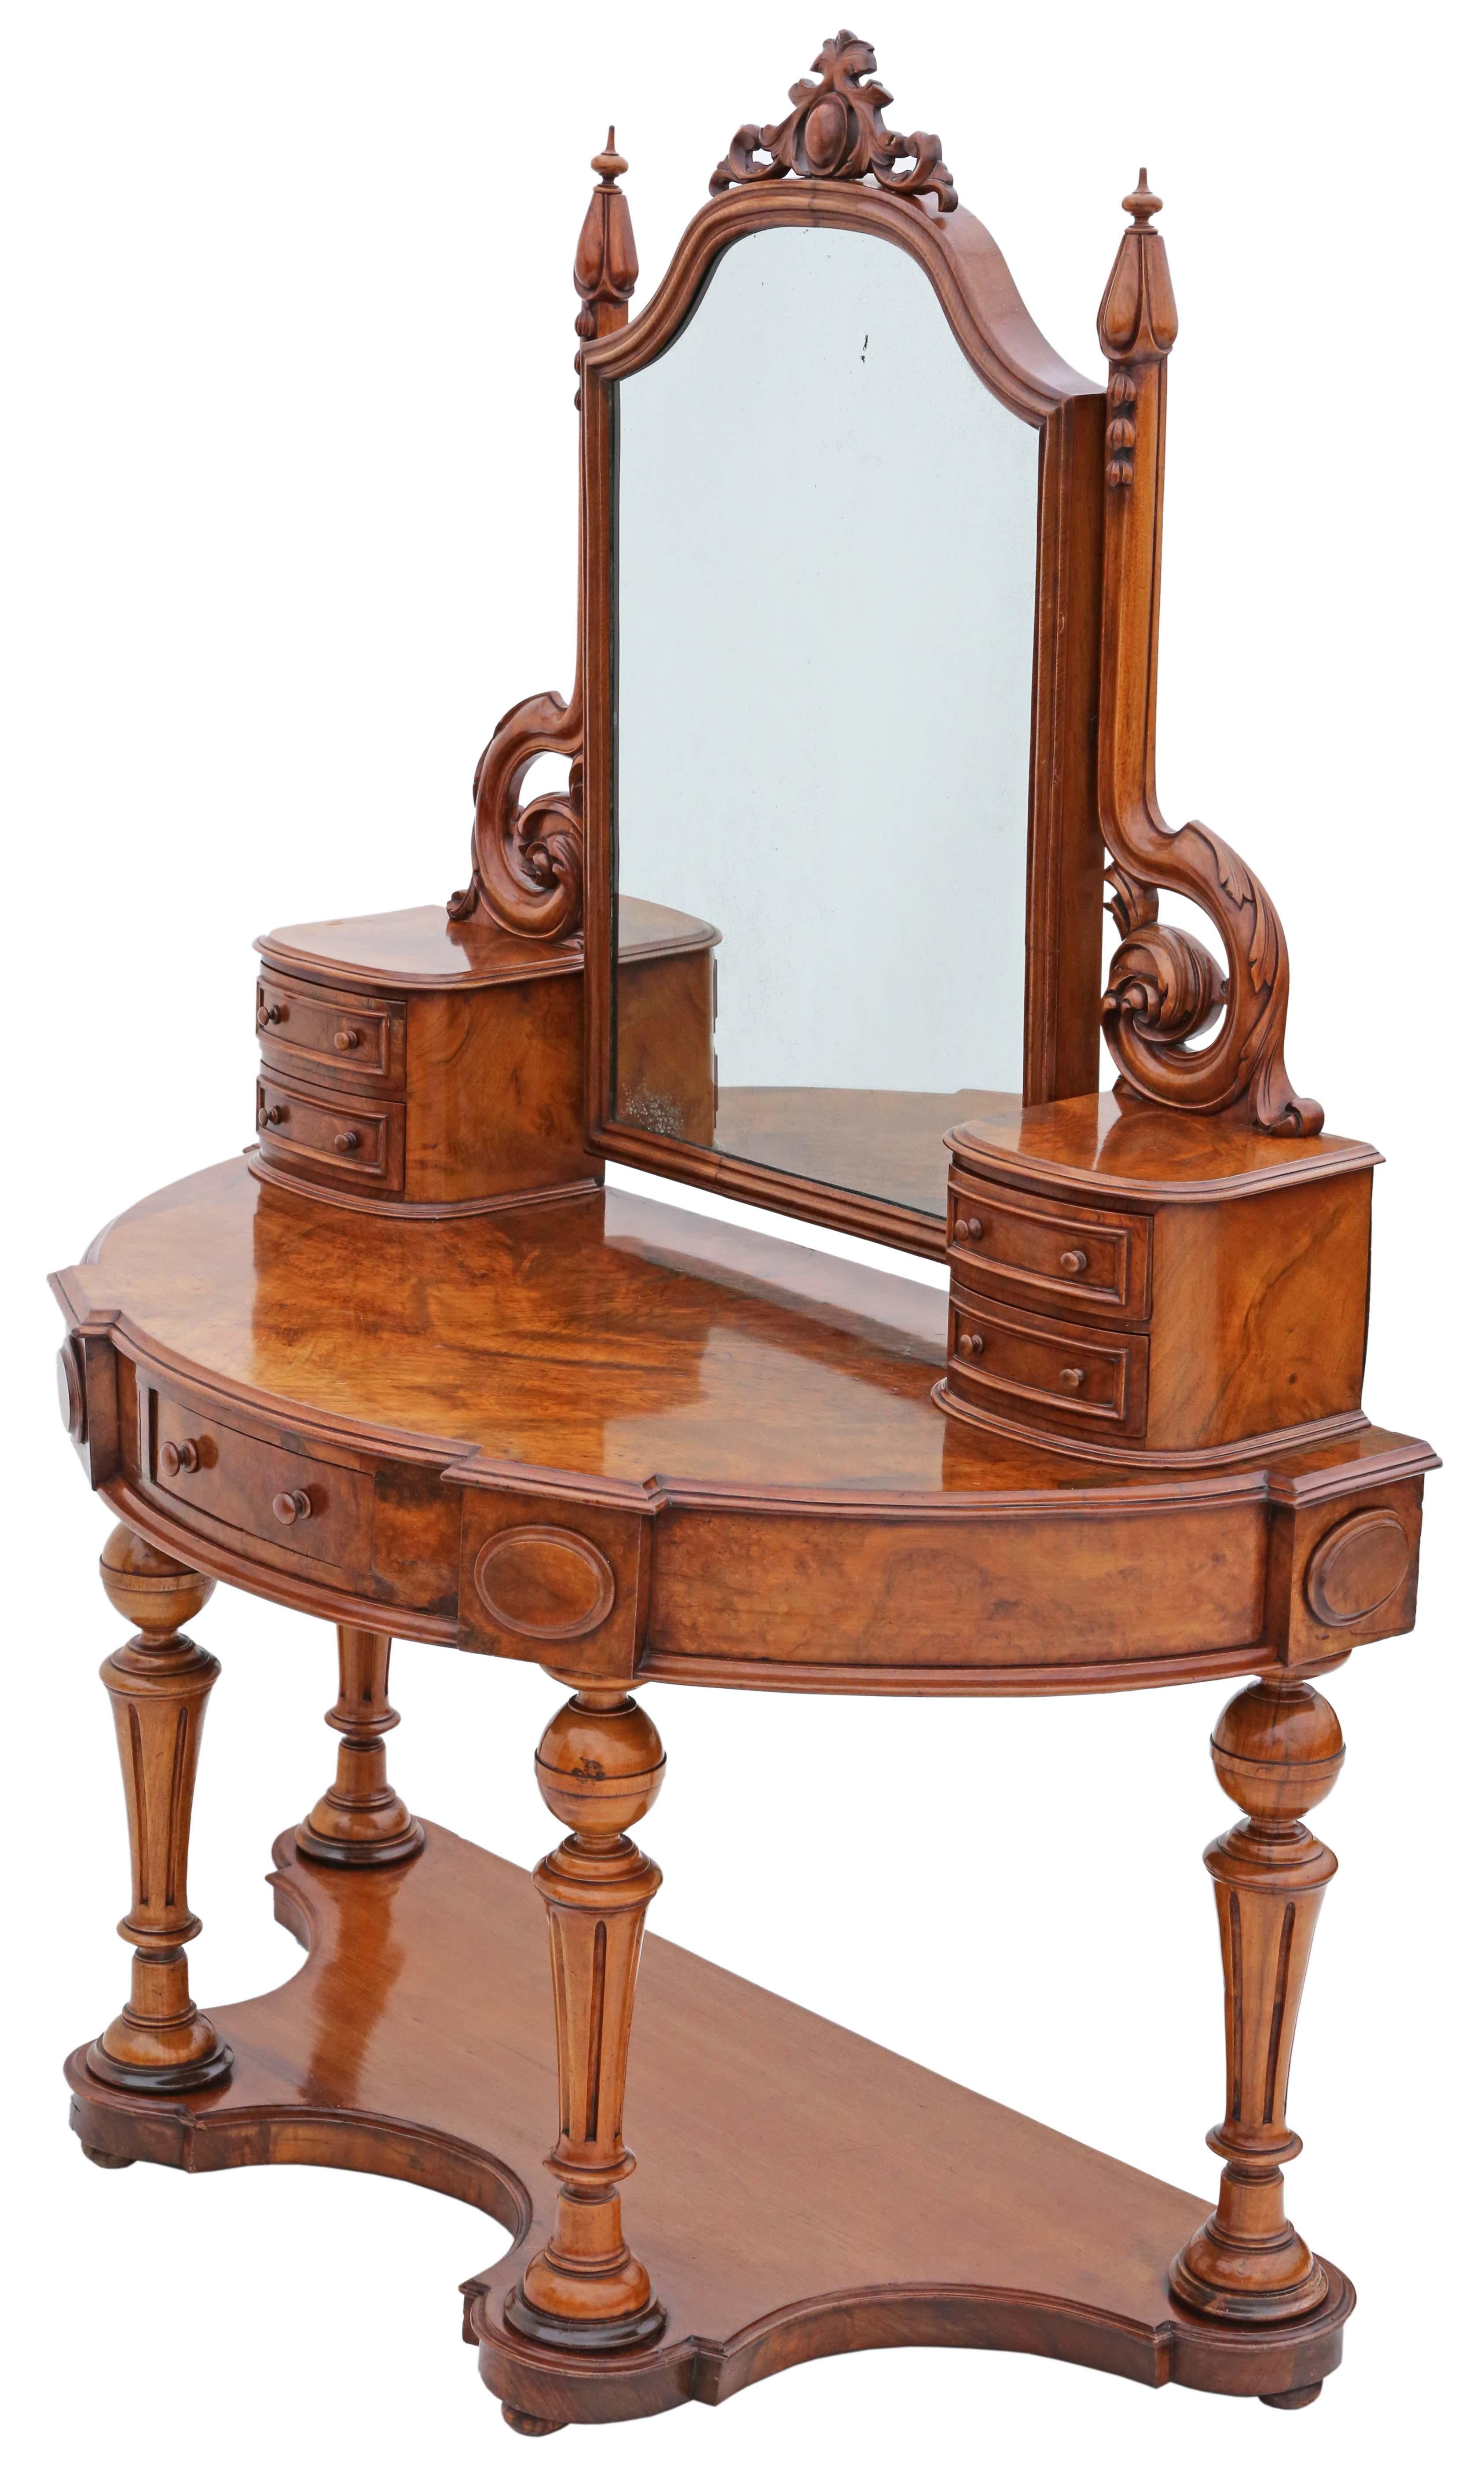 Antique fine quality Victorian 19th Century burr walnut Dutchess dressing table. Lovely age colour and patina.

A very rare breathtaking decorative find.

No loose joints and no woodworm. Full of age, character and charm. The mahogany lined drawers